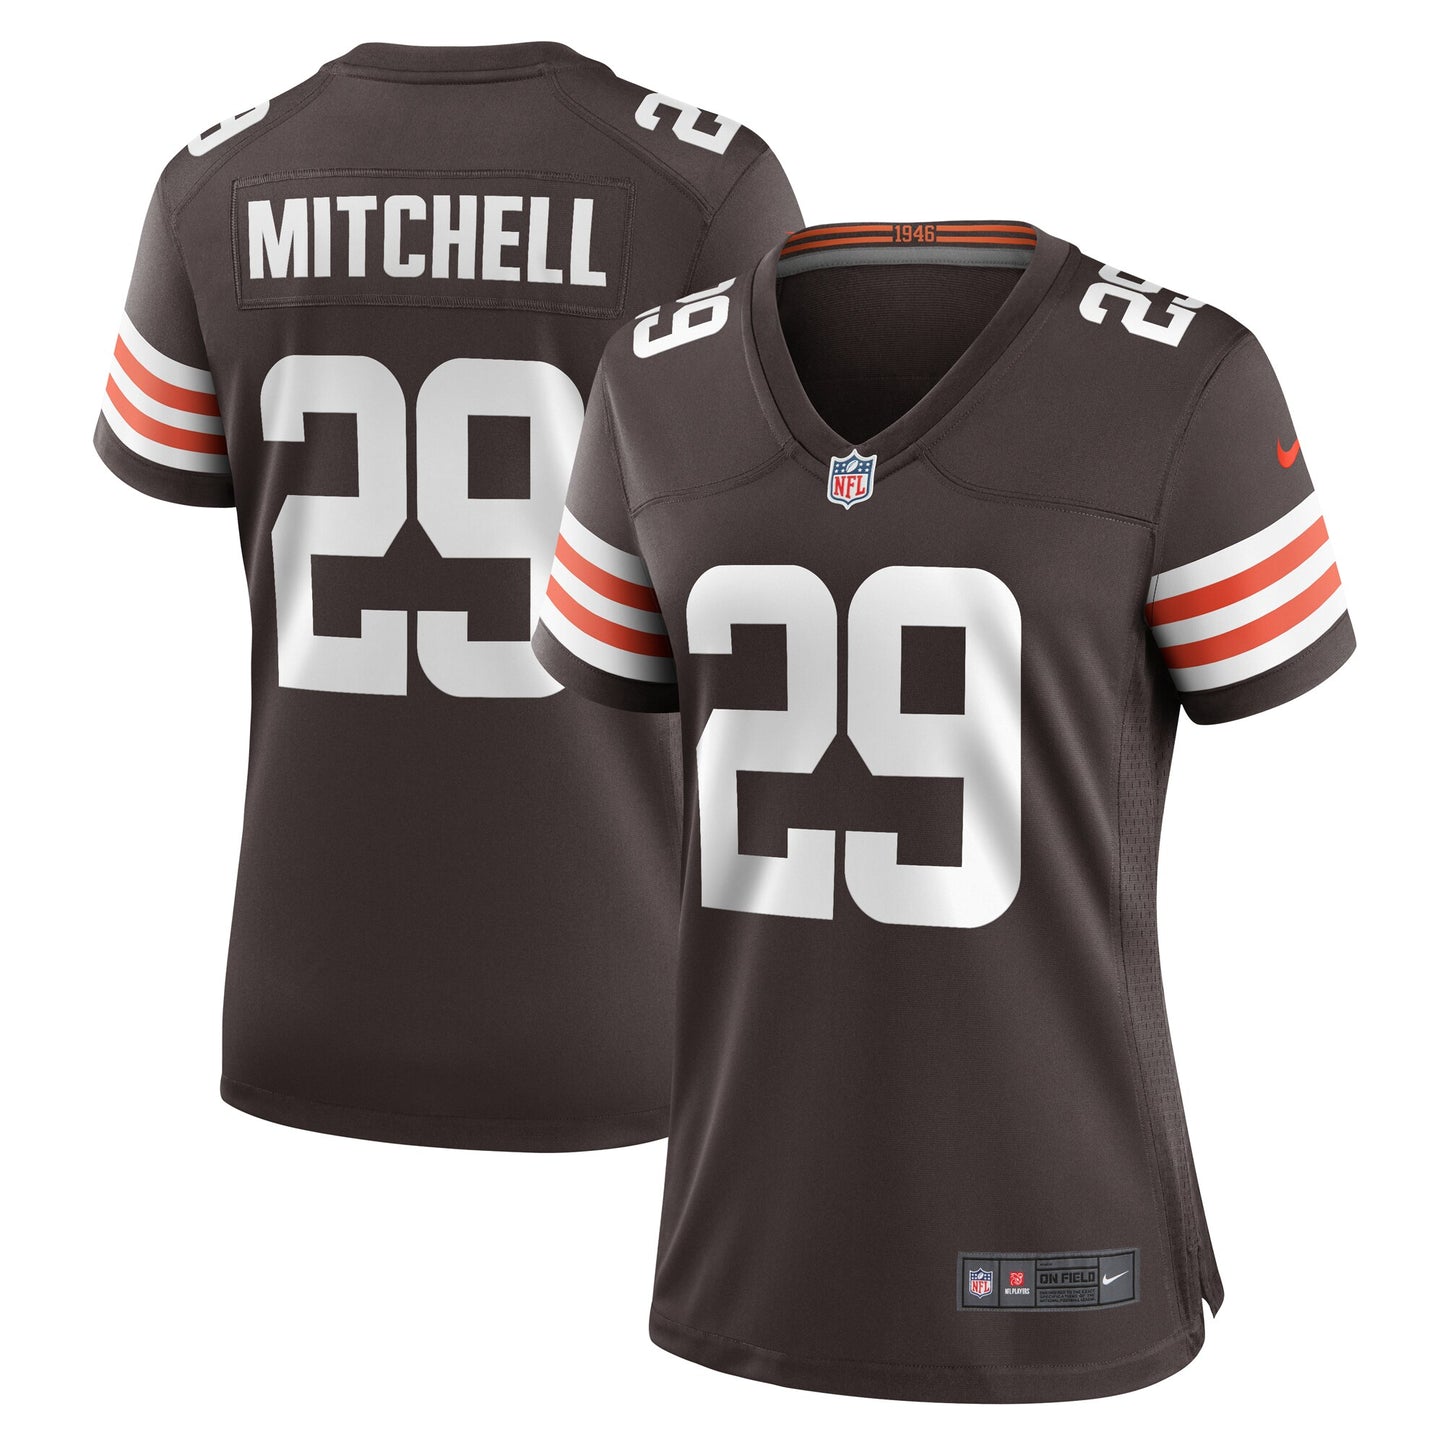 Cameron Mitchell Cleveland Browns Nike Women's Team Game Jersey -  Brown